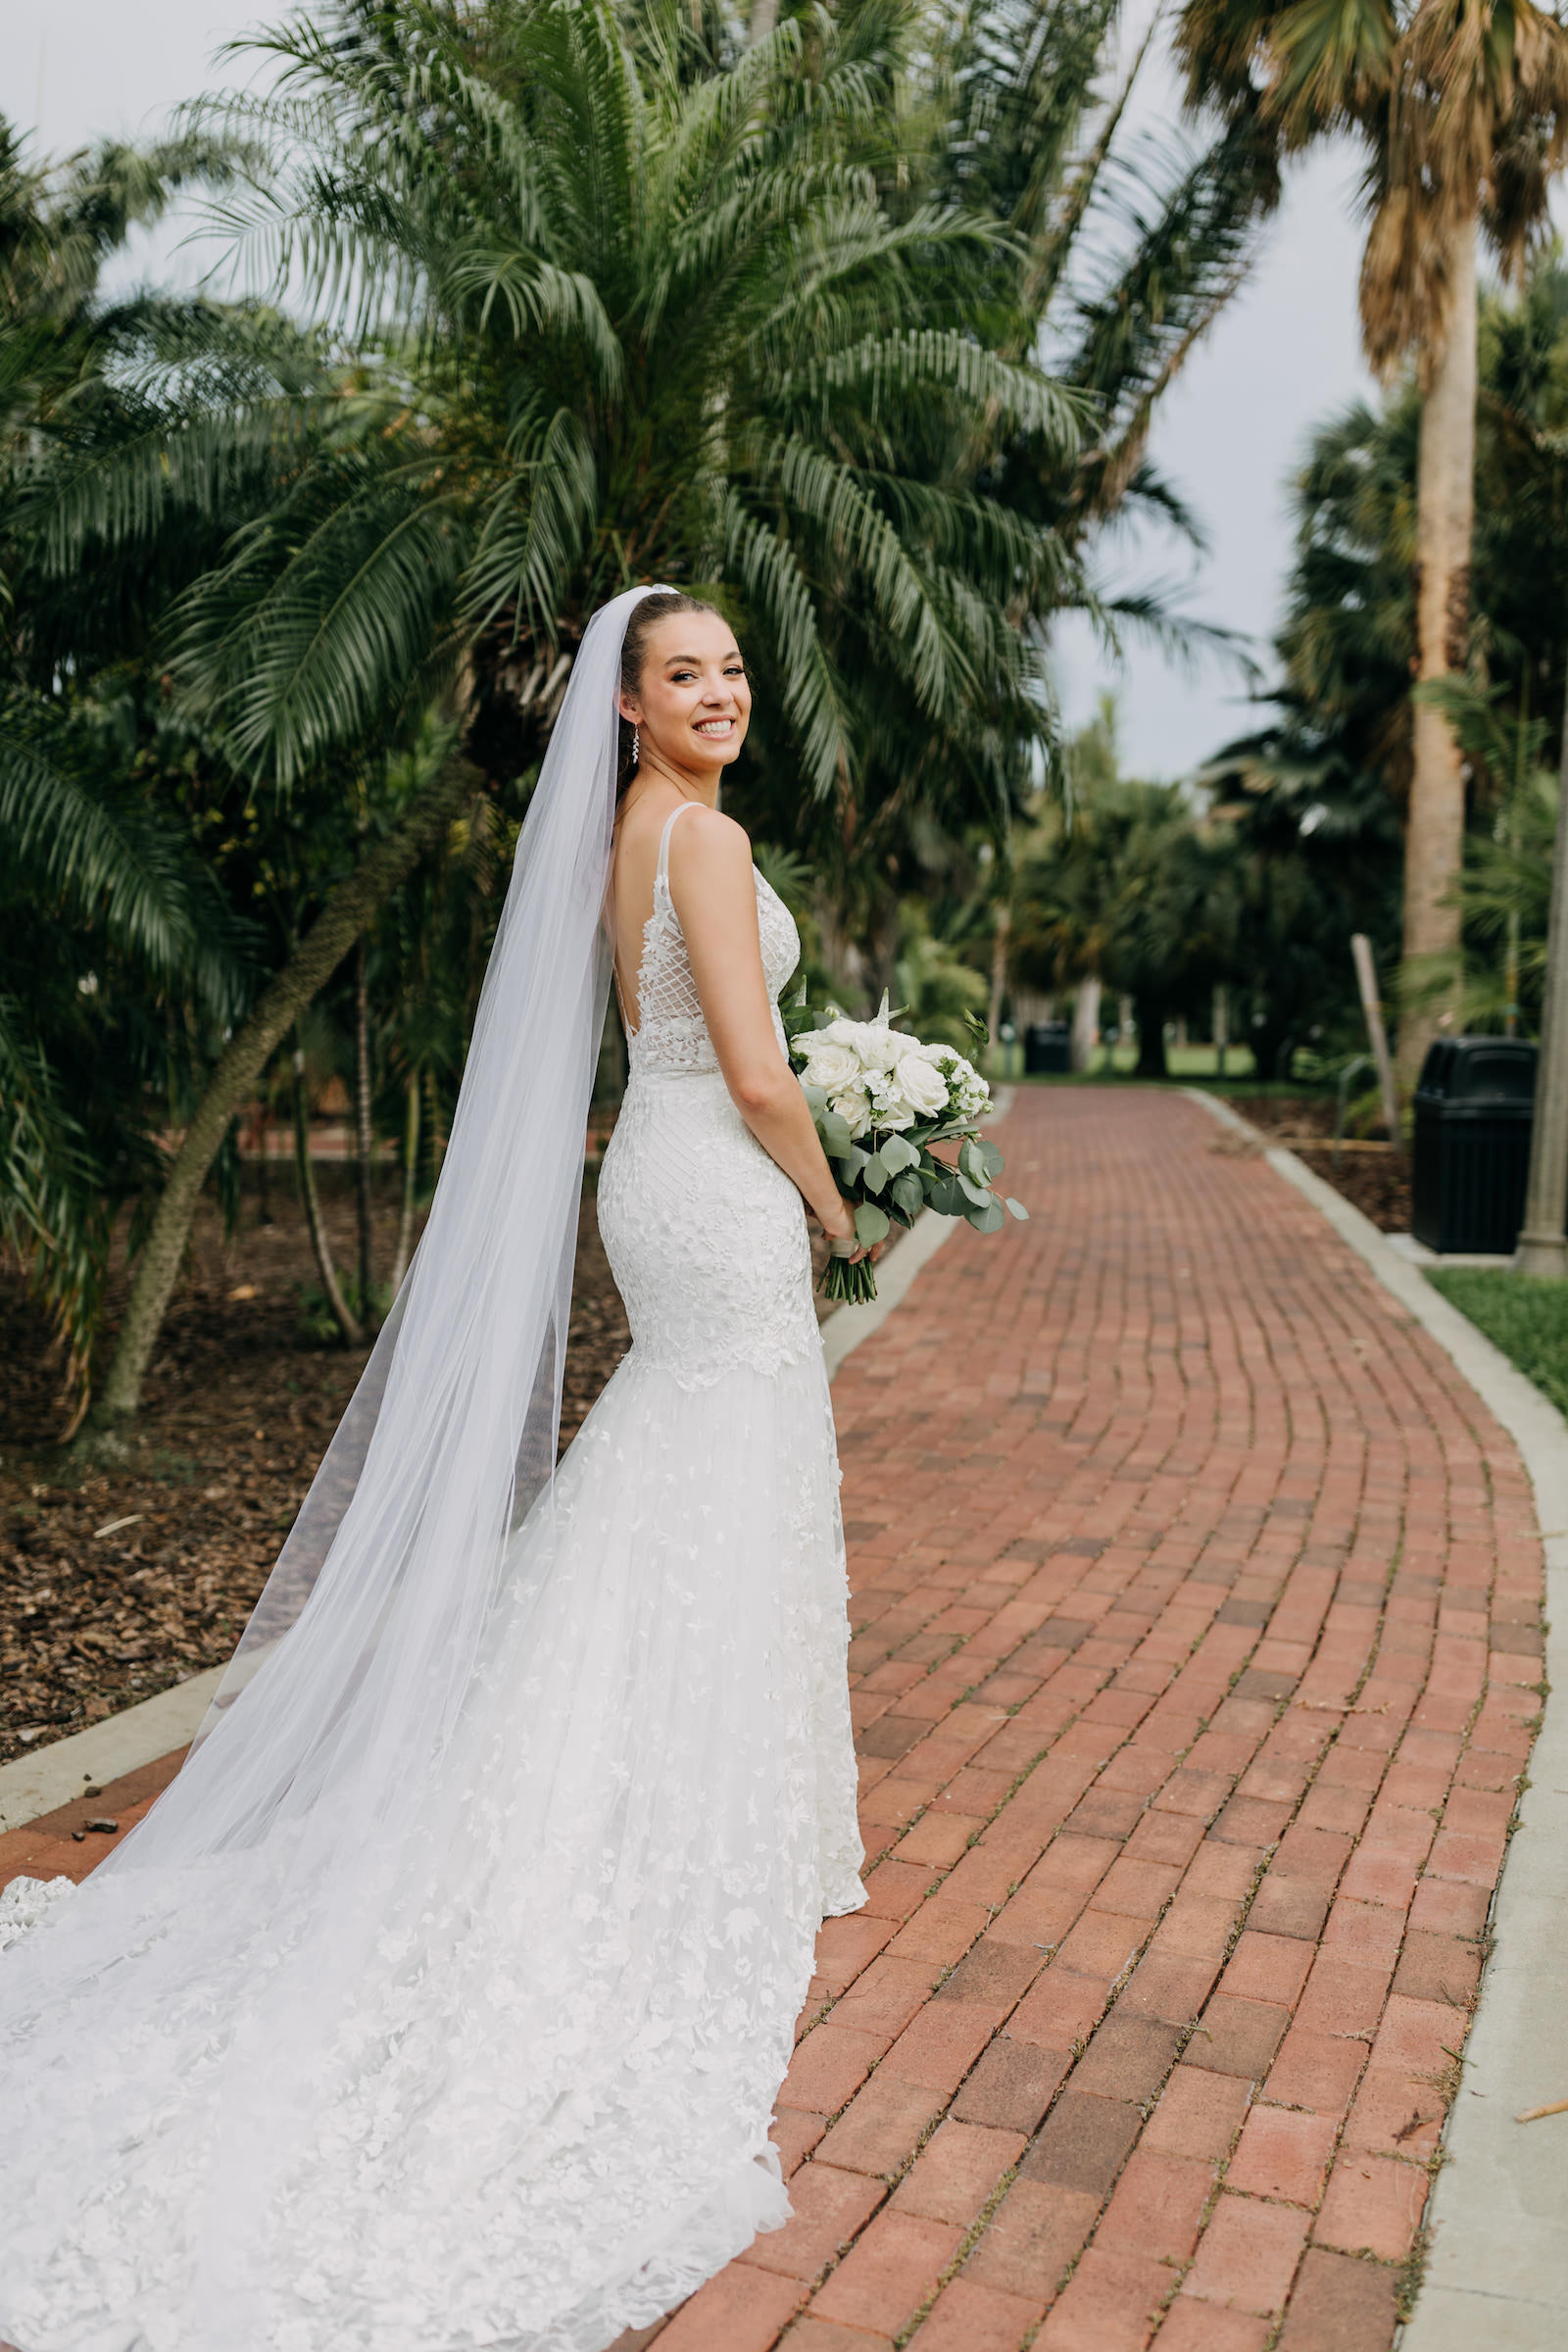 Bride in Embroidered Fitted V Back Wedding Dress and Long Train Veil Wedding Portrait | St. Pete Wedding Photographer Amber McWhorter Photography